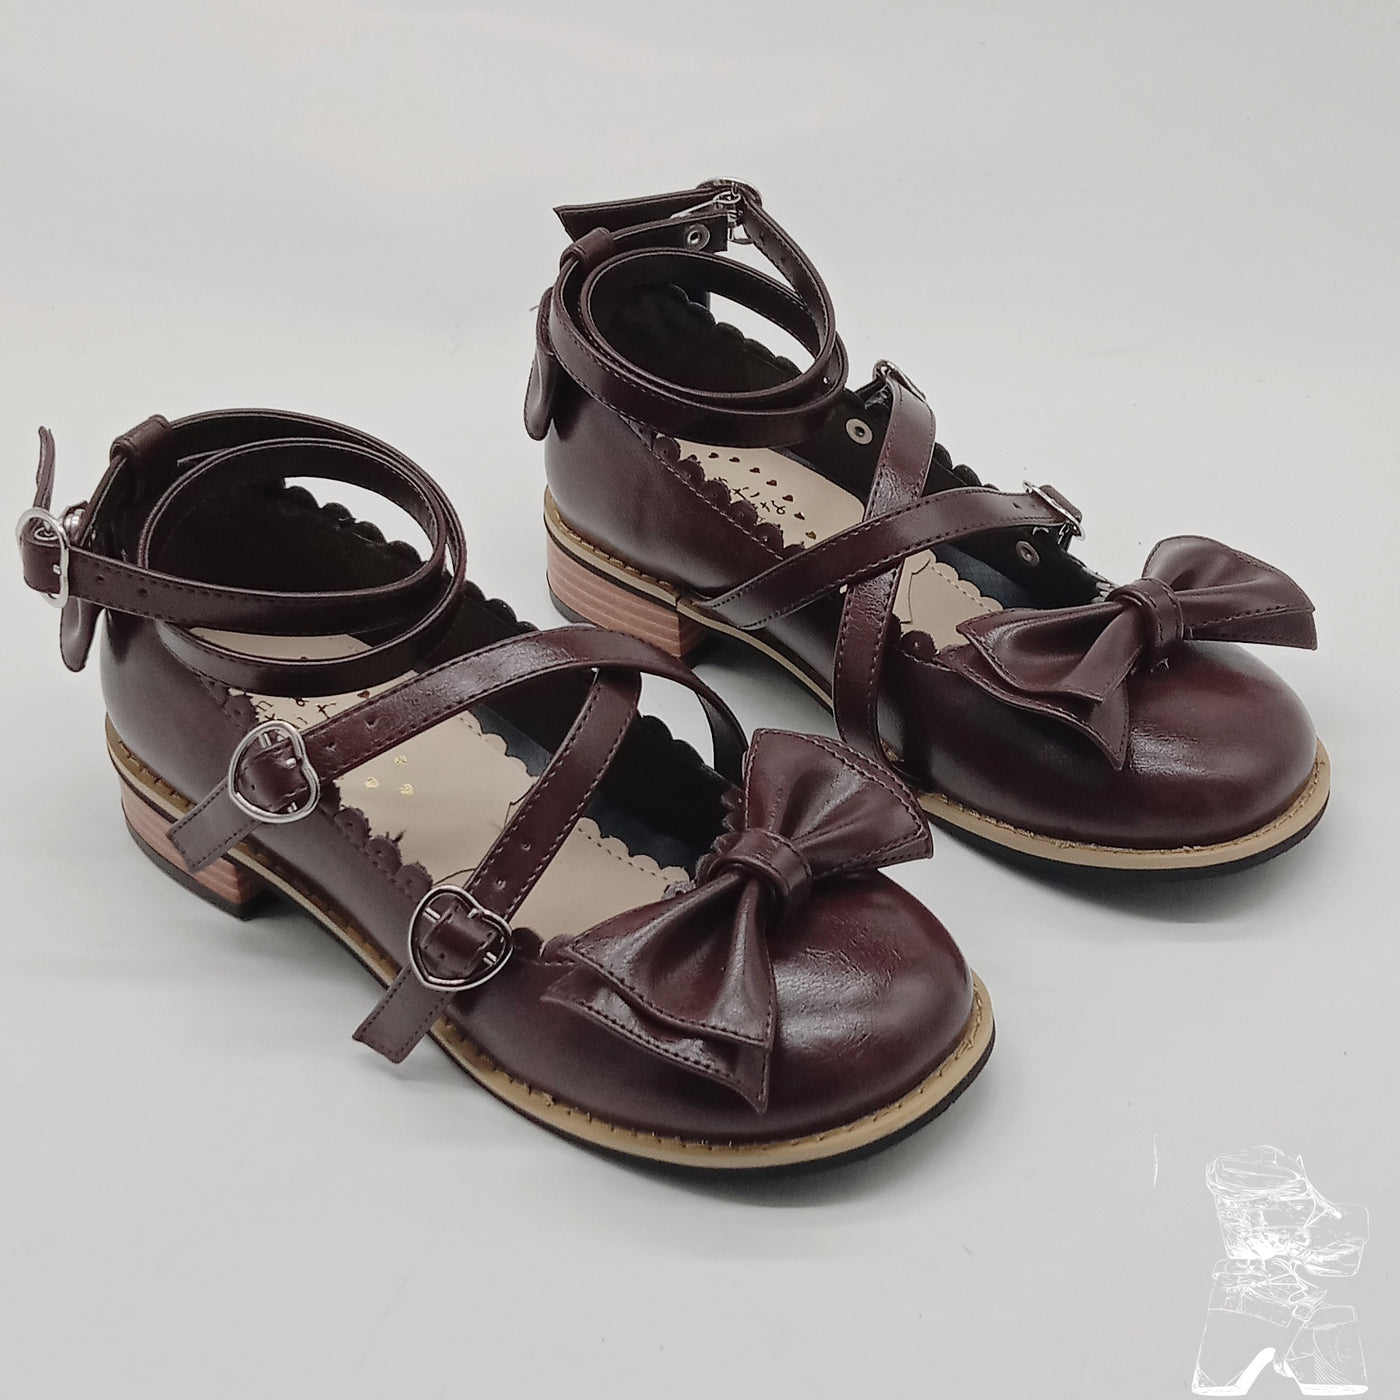 Antaina~ Japanese Style Lolita Tea Party Shoes Size 46-49 matte coffee 46 